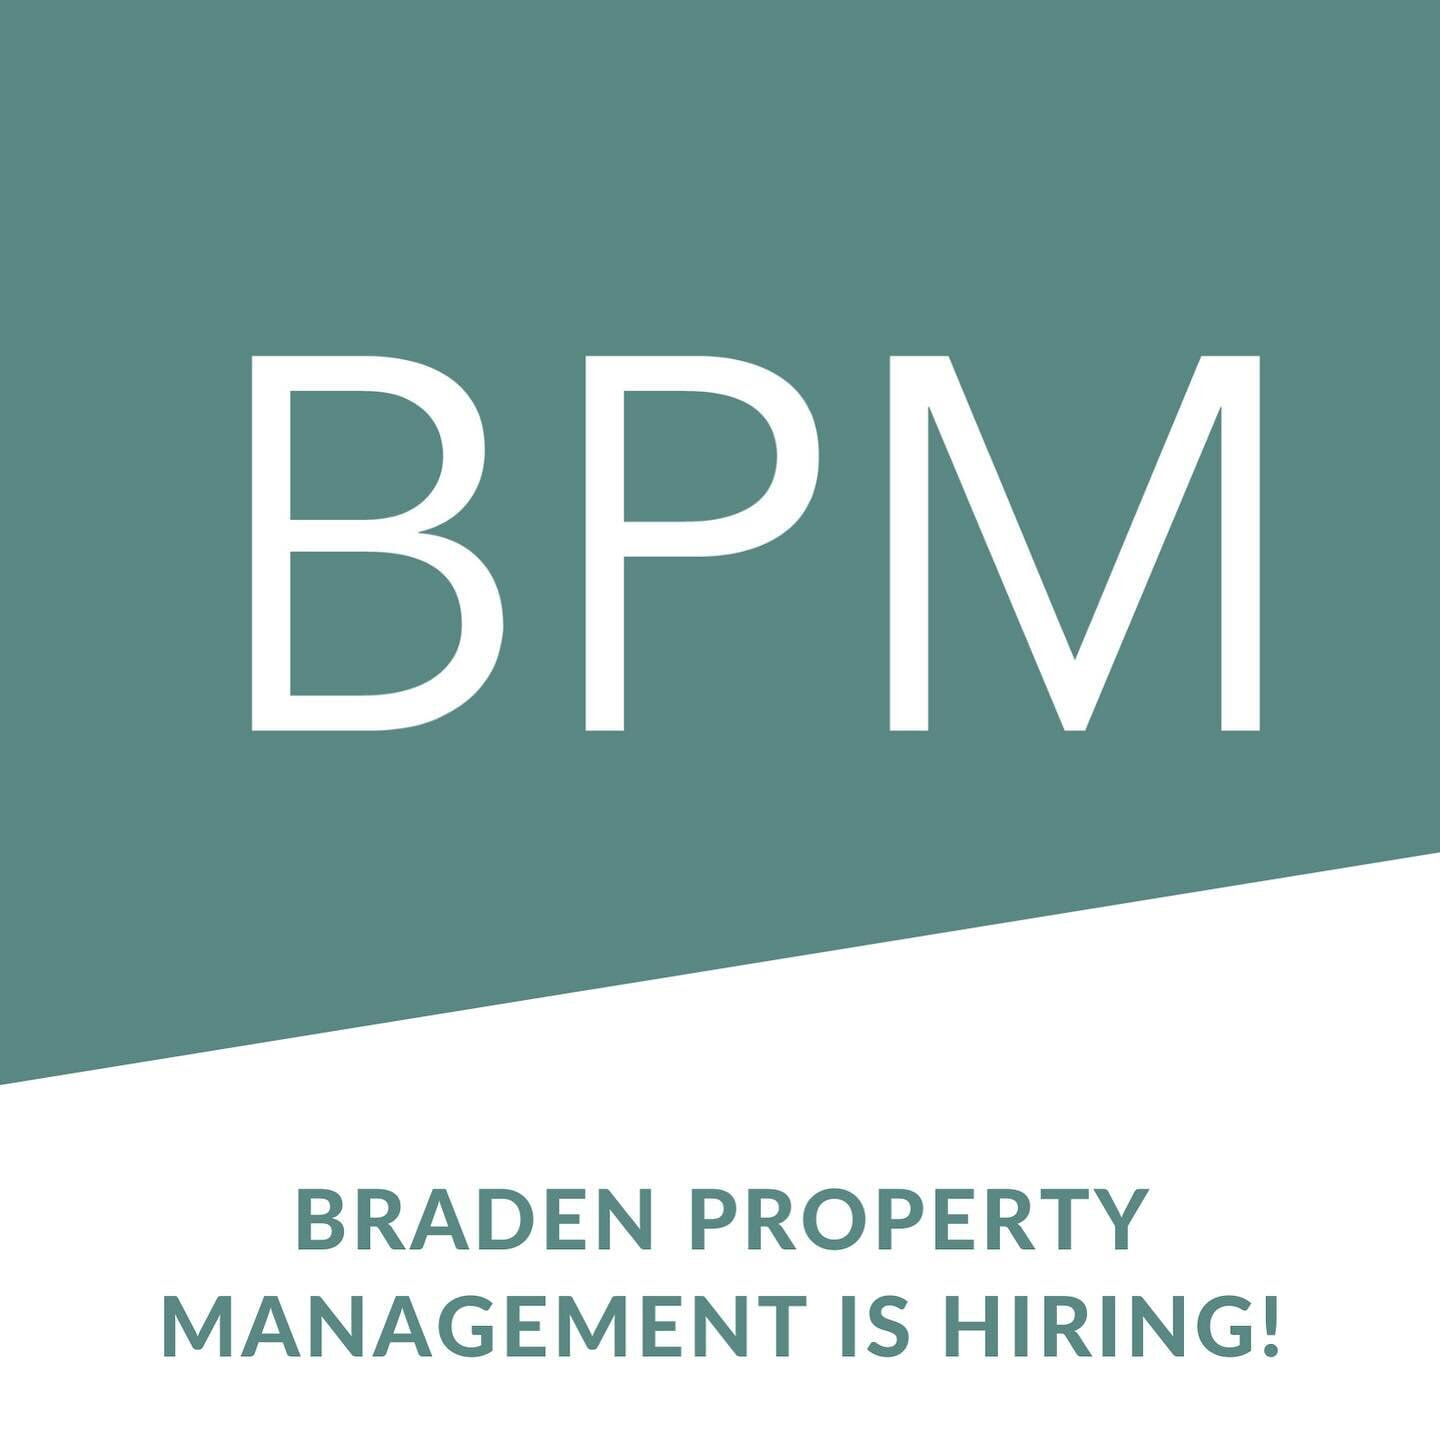 Braden Property Management Is Hiring 🛠️

@bradenpropertycville is searching for a Maintenance Field Technician to provide quick and thorough repairs for a variety of issues throughout our portfolio of homes in and around the Charlottesville area. Th